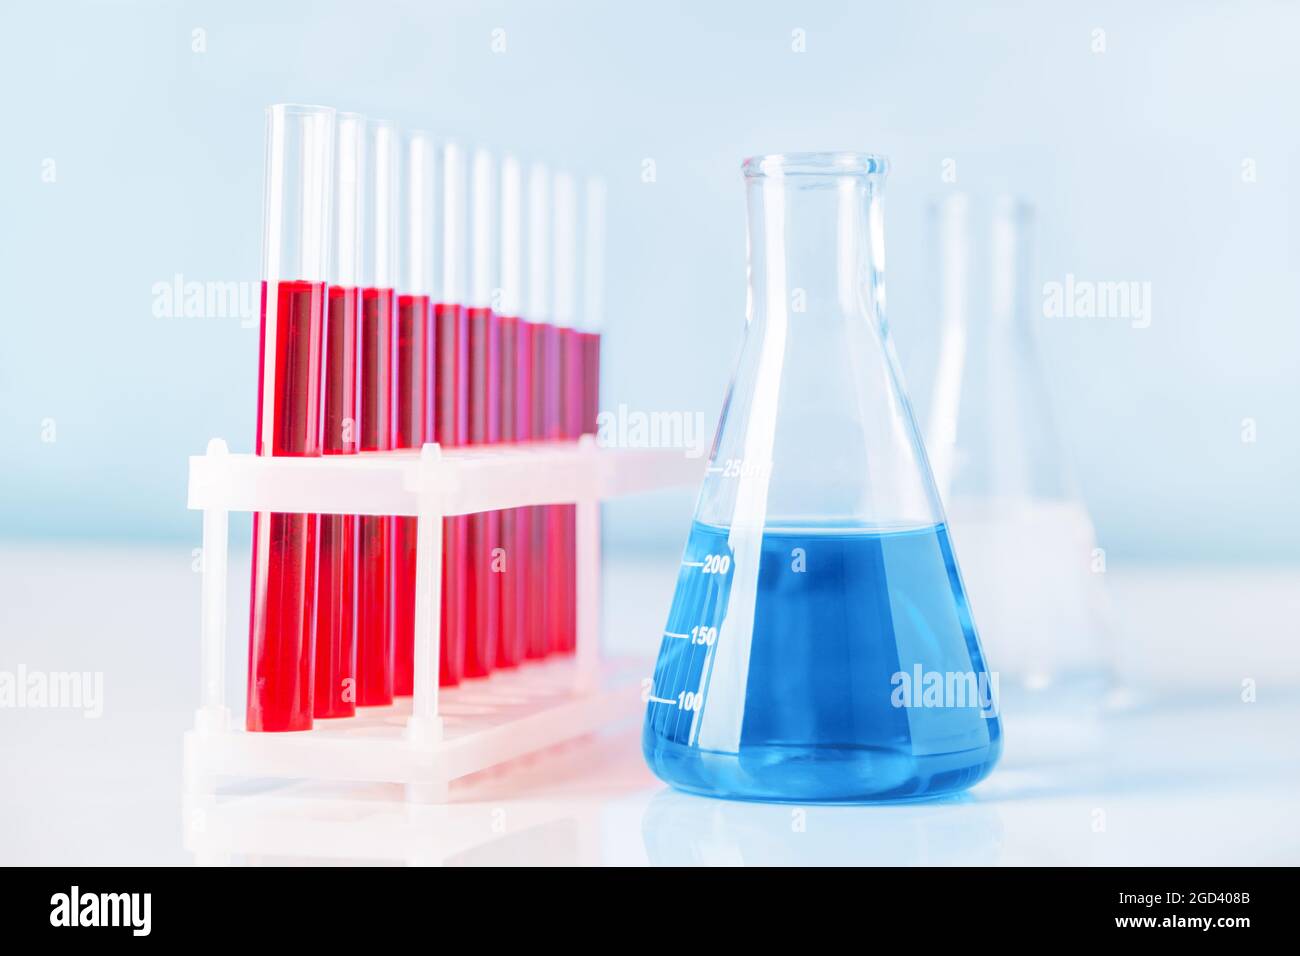 Set of test tubes and flask in science or medical lab Stock Photo